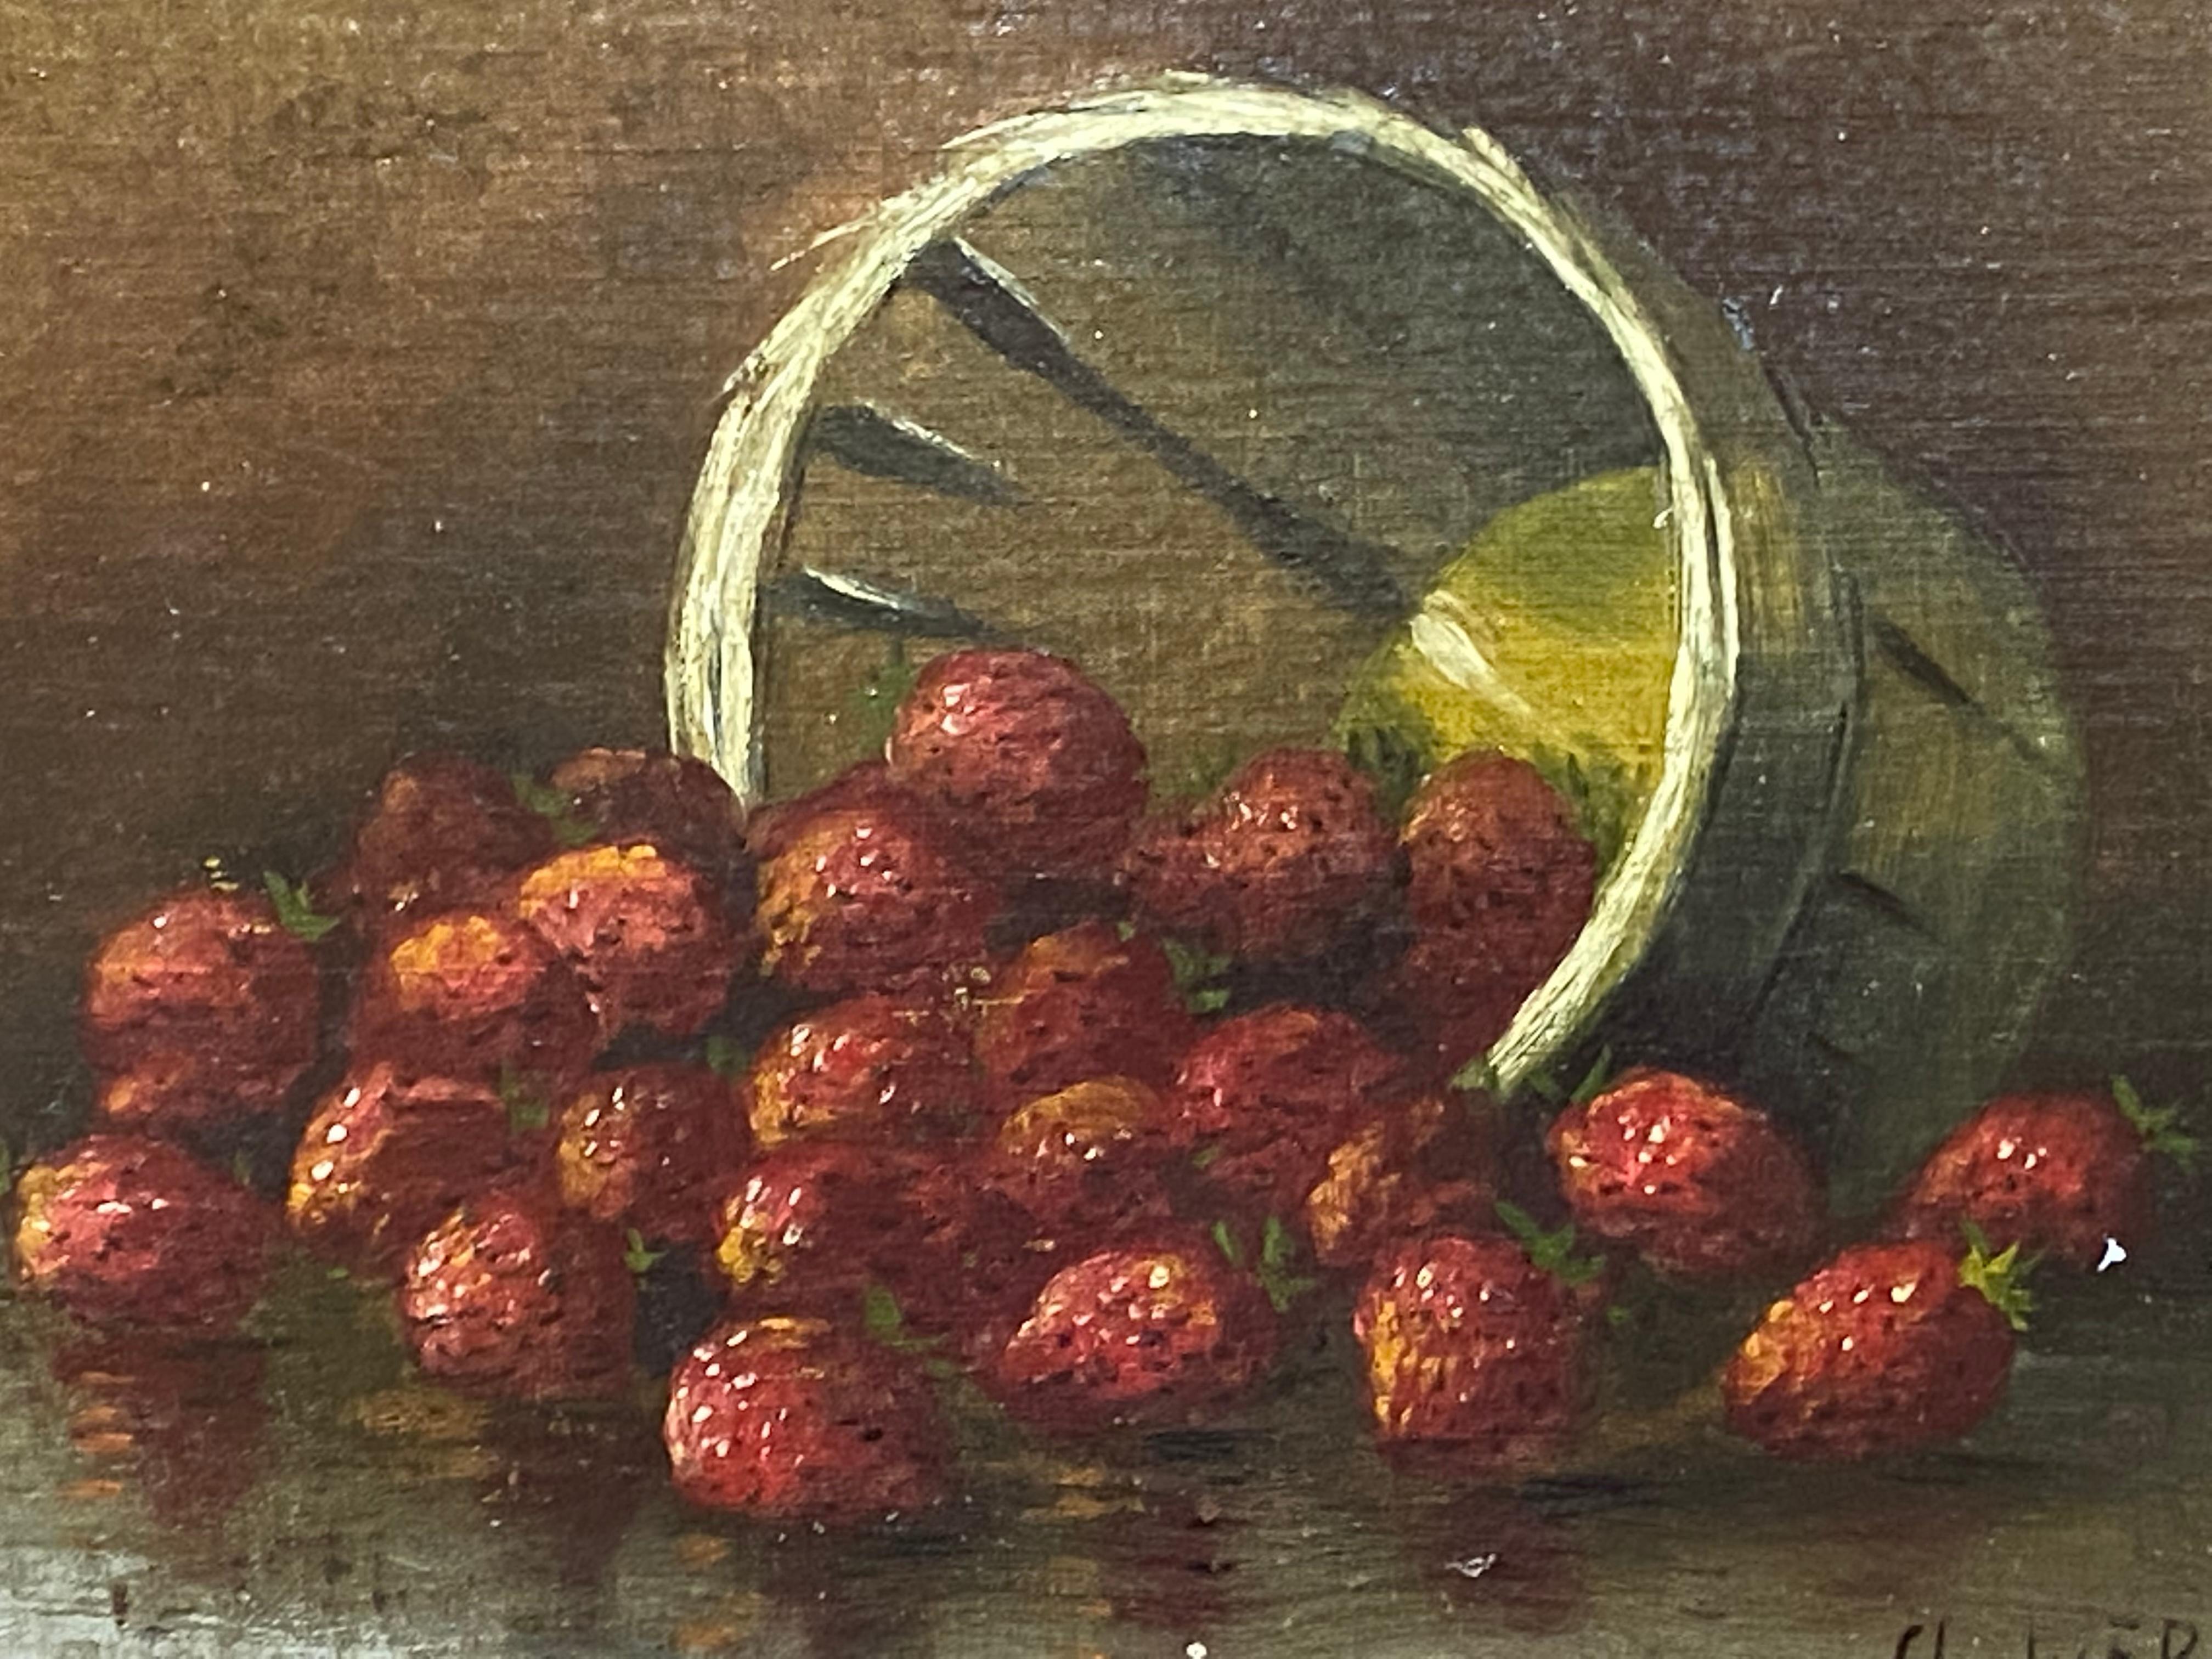 Very nicely executed original still life oil painting on fiberboard of strawberries by an unknown artist. Signed lower right, Charles Burch. I believe this painting is quite possibly the work of Edward Pritchard, the Wales born artist but who spent